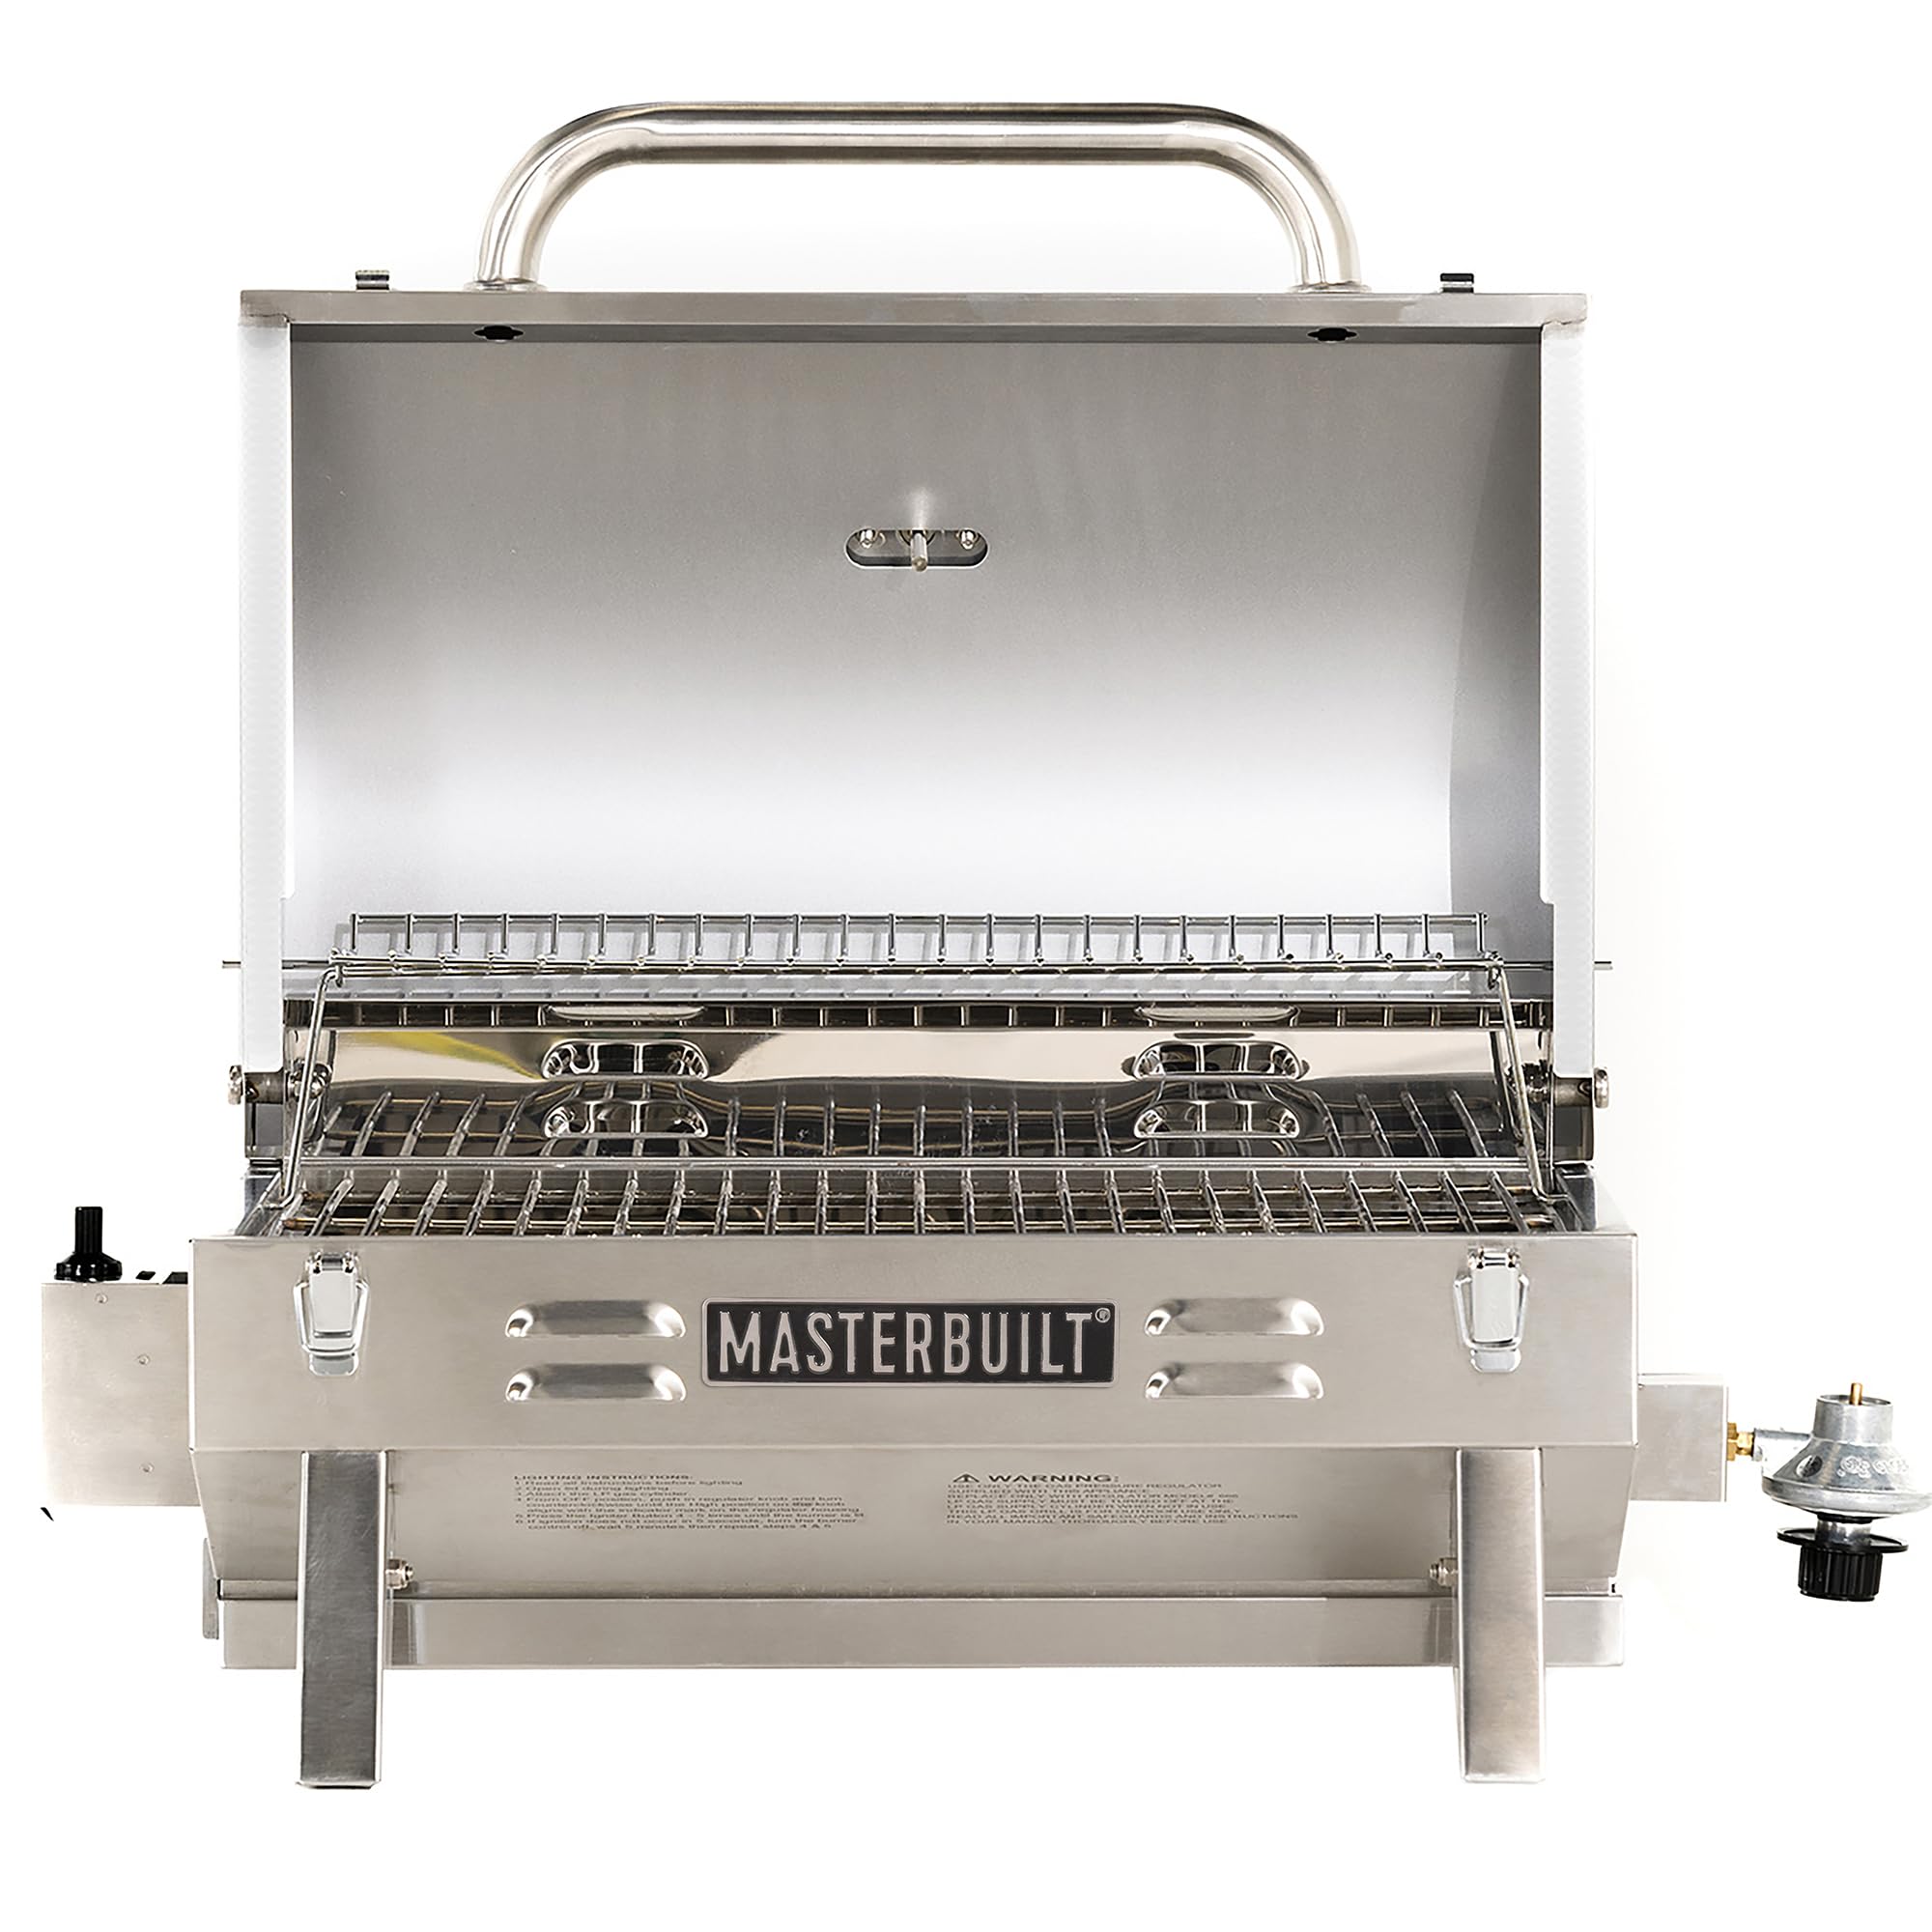 Masterbuilt Propane Portable Gas Grill (Stainless Steel) $91.31 + Free Shipping